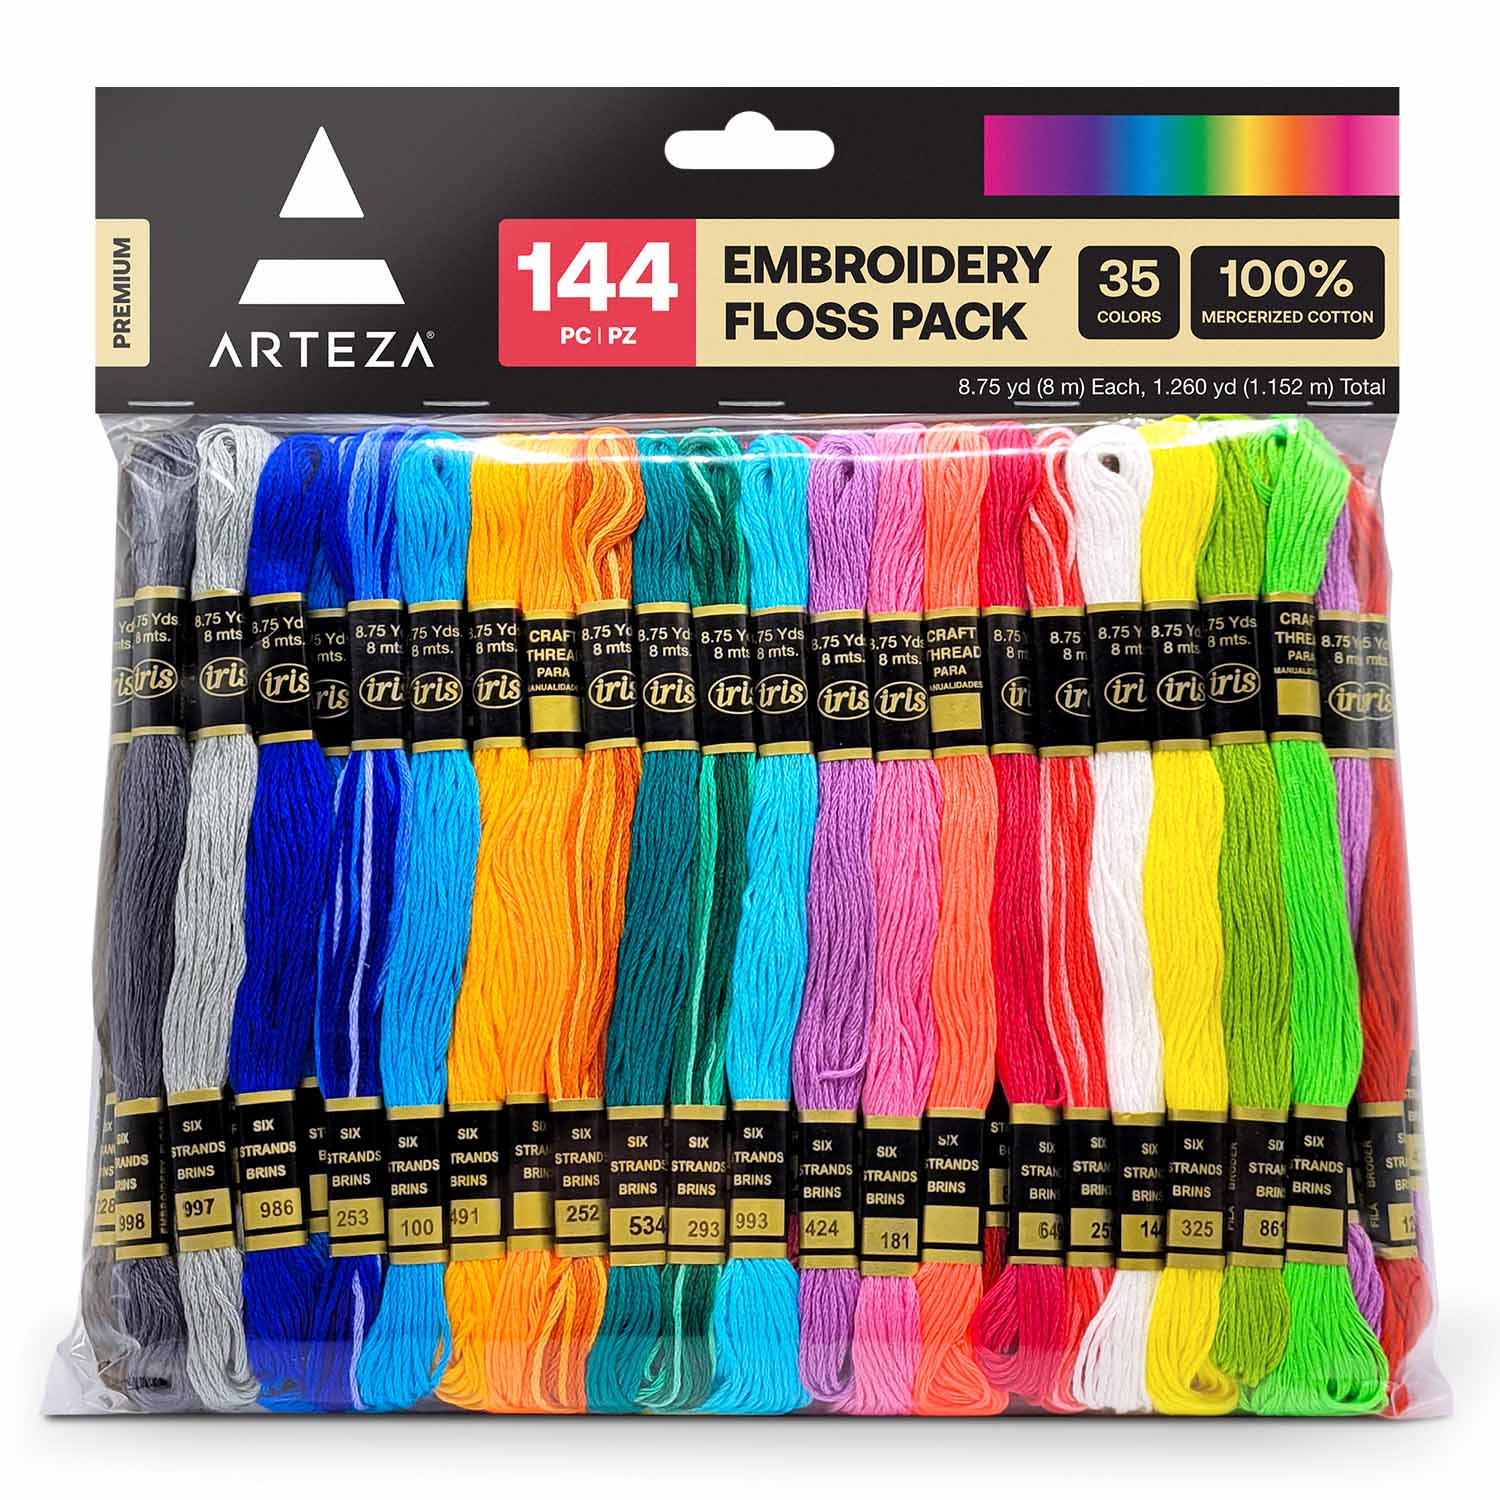 Arteza Embroidery Floss, Variegated Colors - 80 Pieces